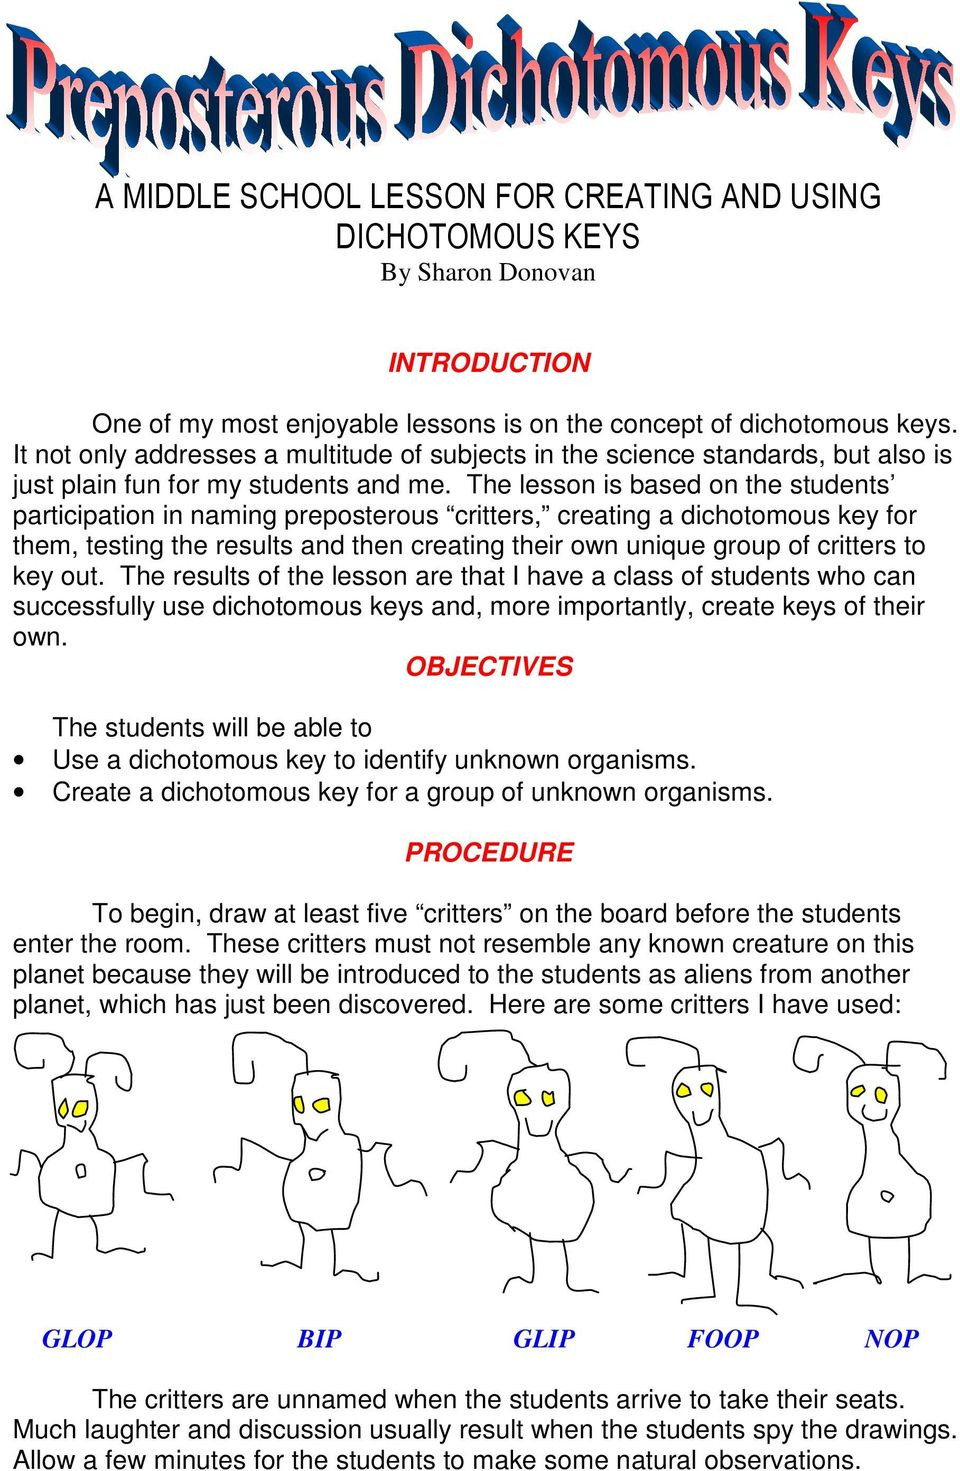 Dichotomous Key Worksheet Middle School A Middle School Lesson for Creating and Using Dichotomous